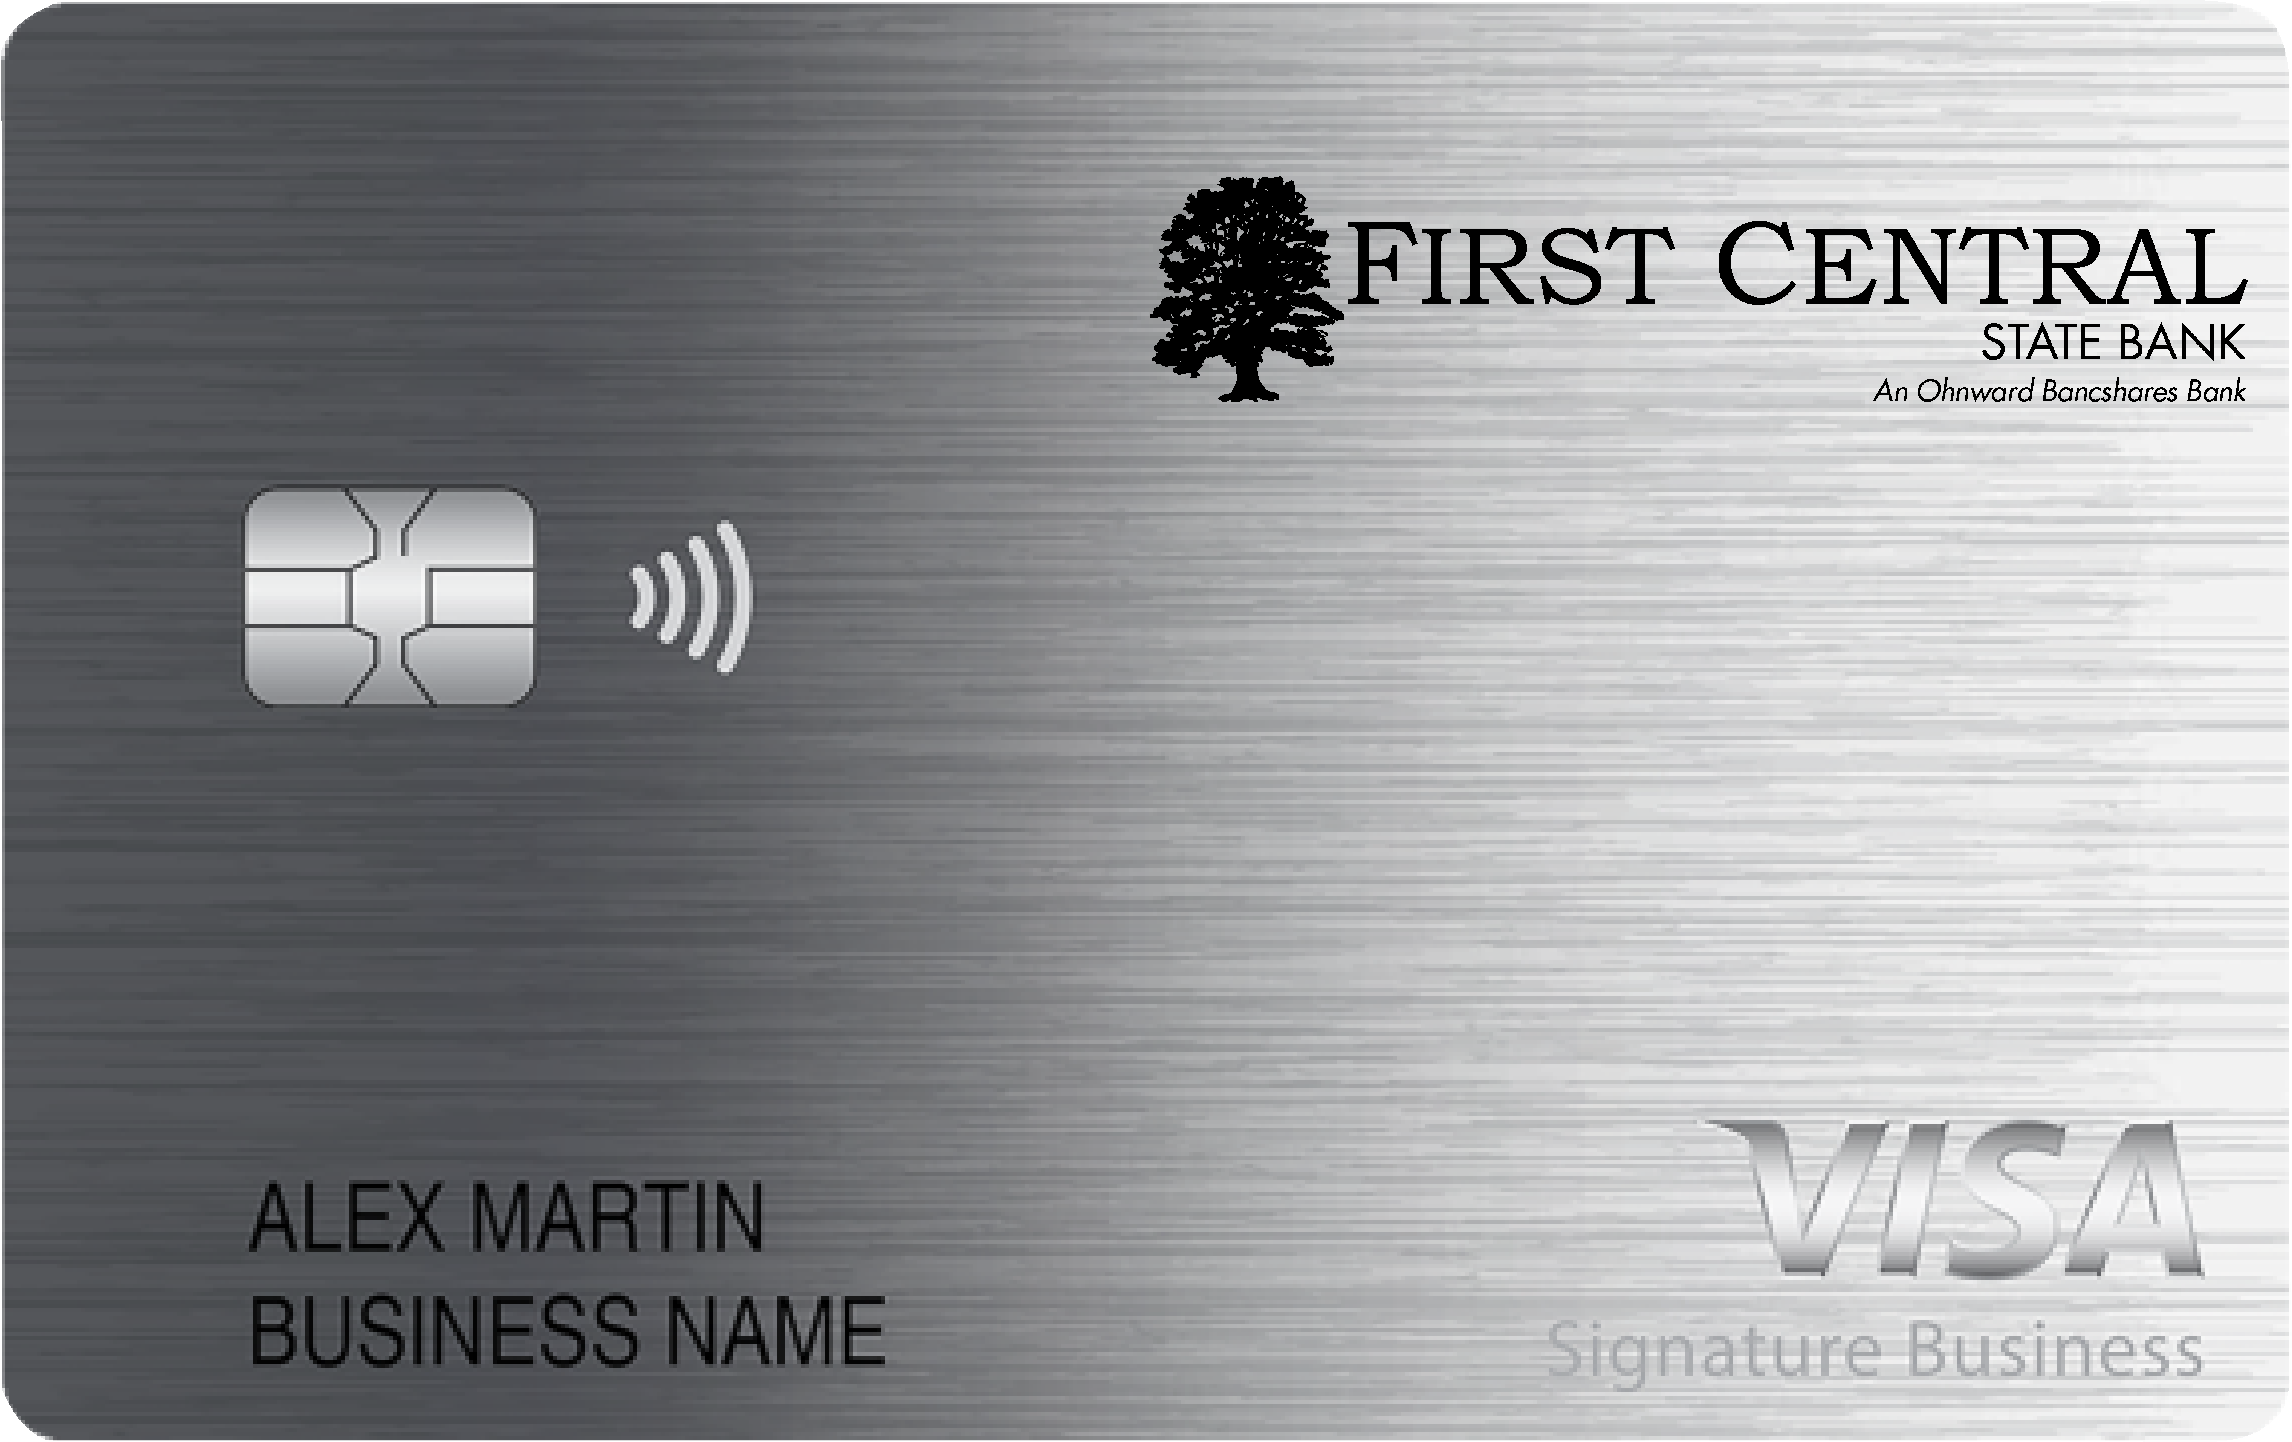 First Central State Bank Smart Business Rewards Card